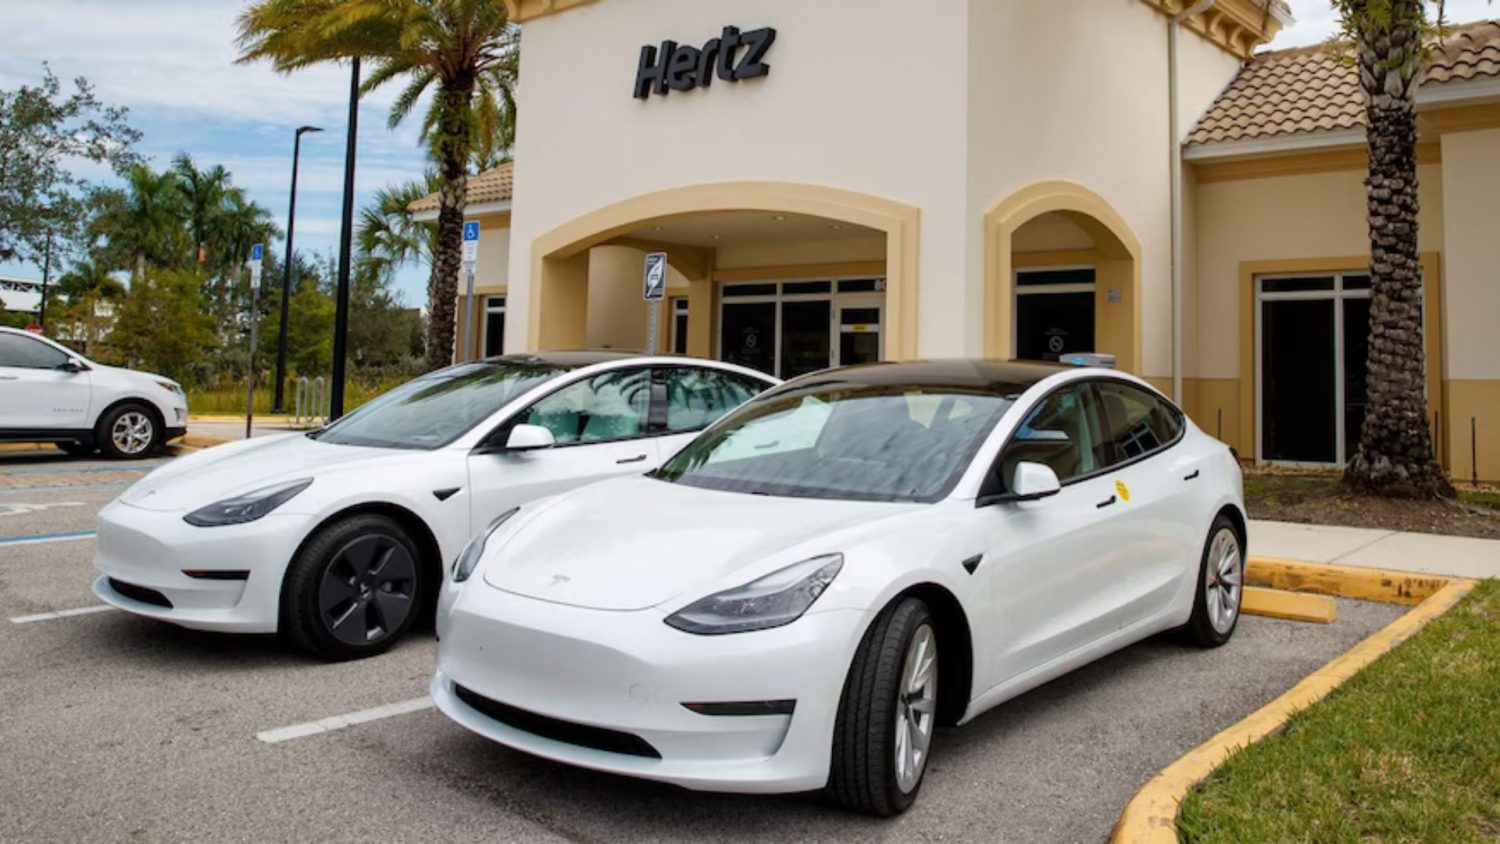 Well-known rental car company Hertz announced that it would sell around one-third of its EV fleet due to the depreciation of EVs.